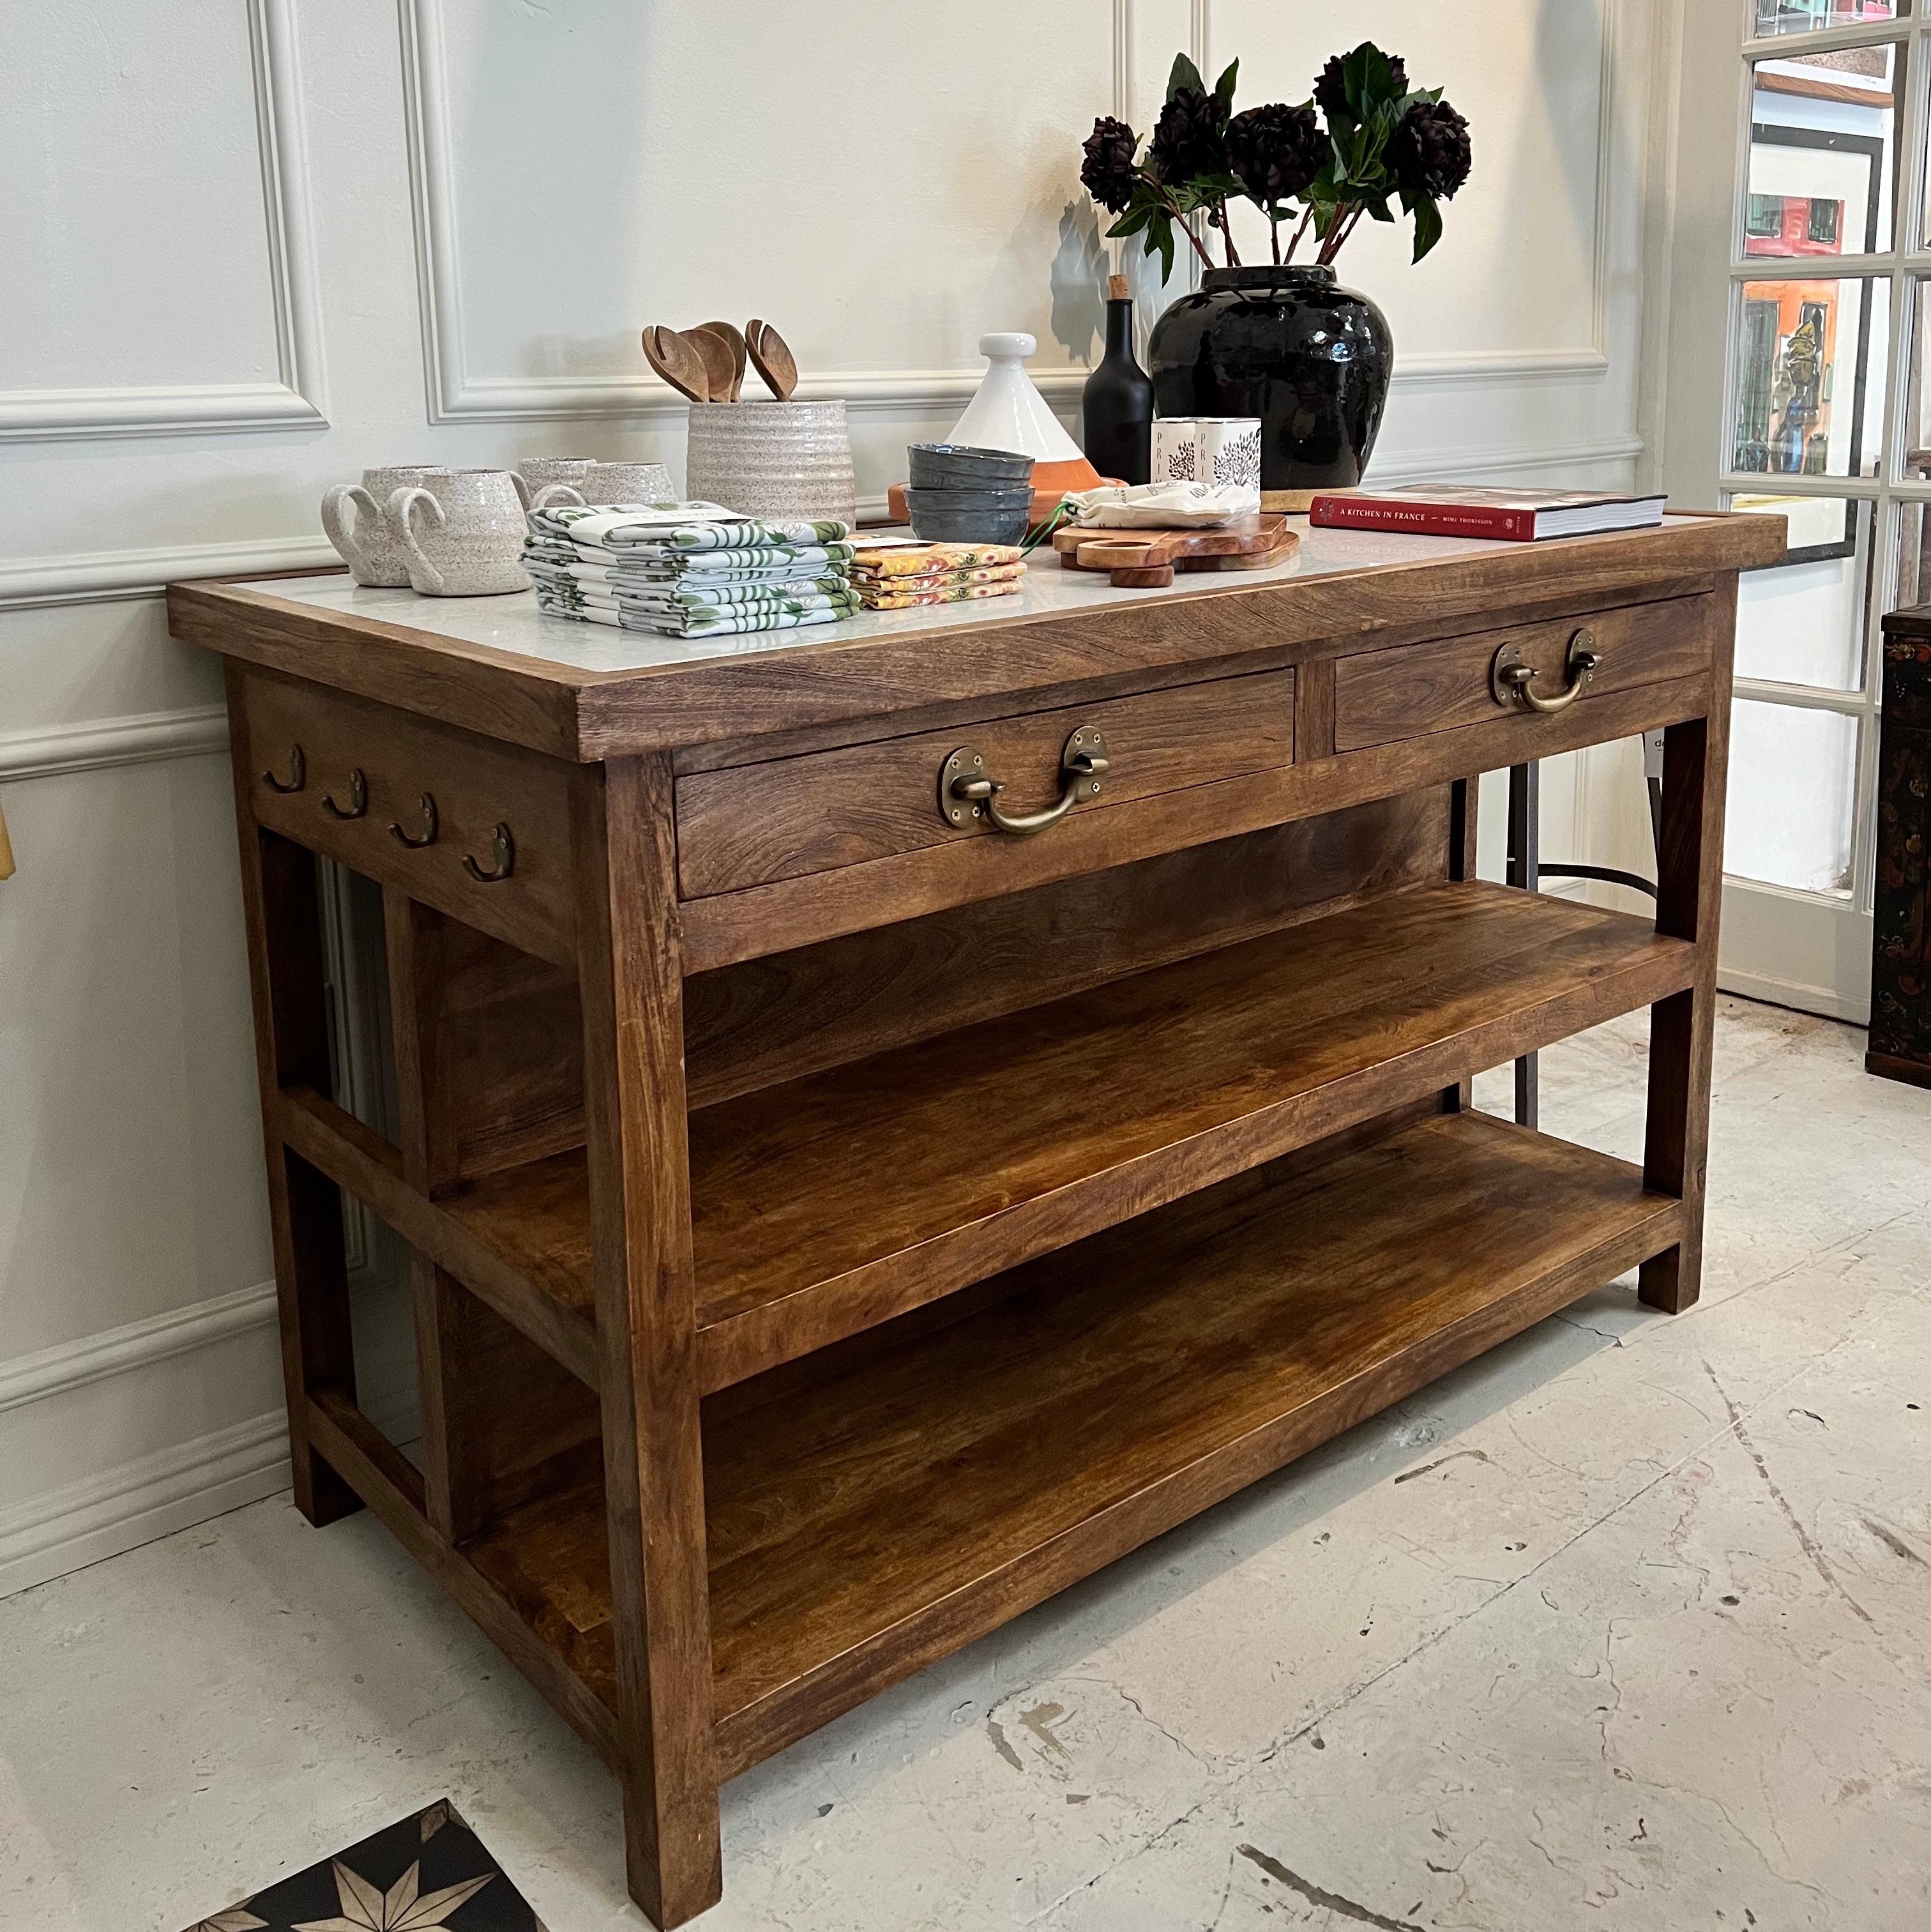 This beautiful and functional free standing kitchen island features medium brown natural wood finish and white stone top. Hooks and hanger rod for storage as well as shelves and drawers. Back side offers space to fit 2-3 bar stools

Measures: 58